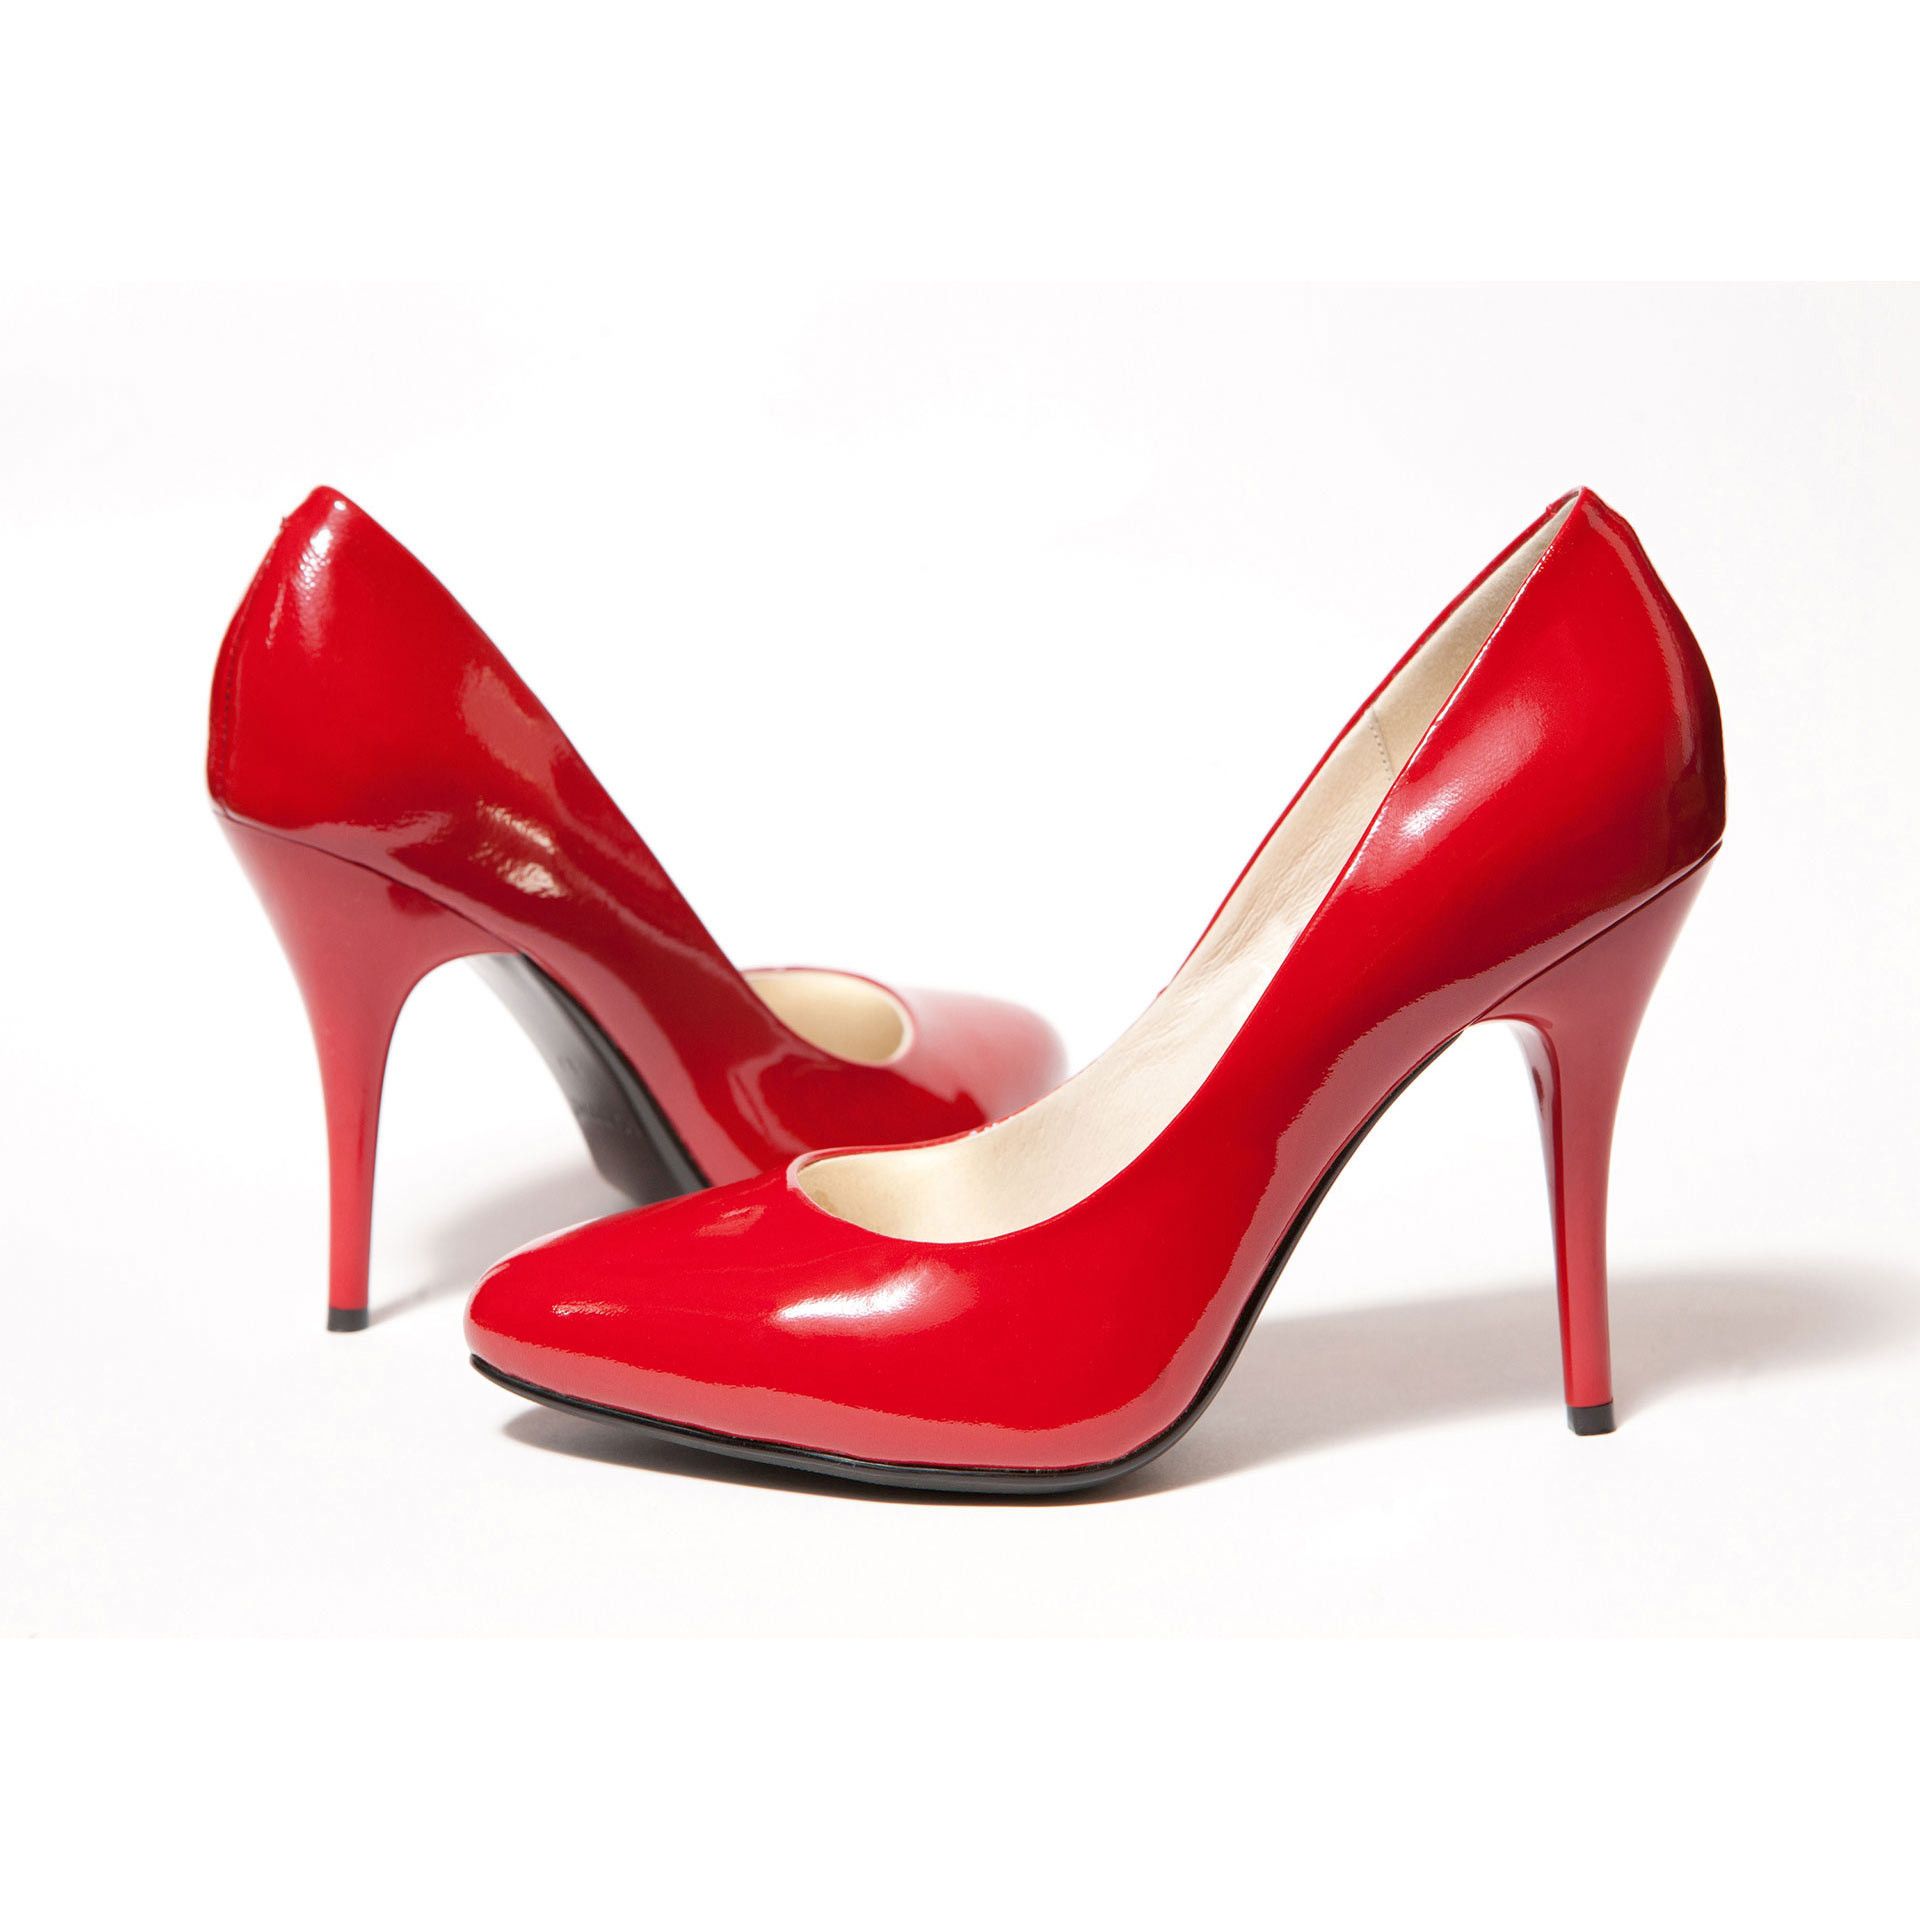 Red High Heel Women Shoes On White Background Data Heeled Red Shoes HD Wallpaper